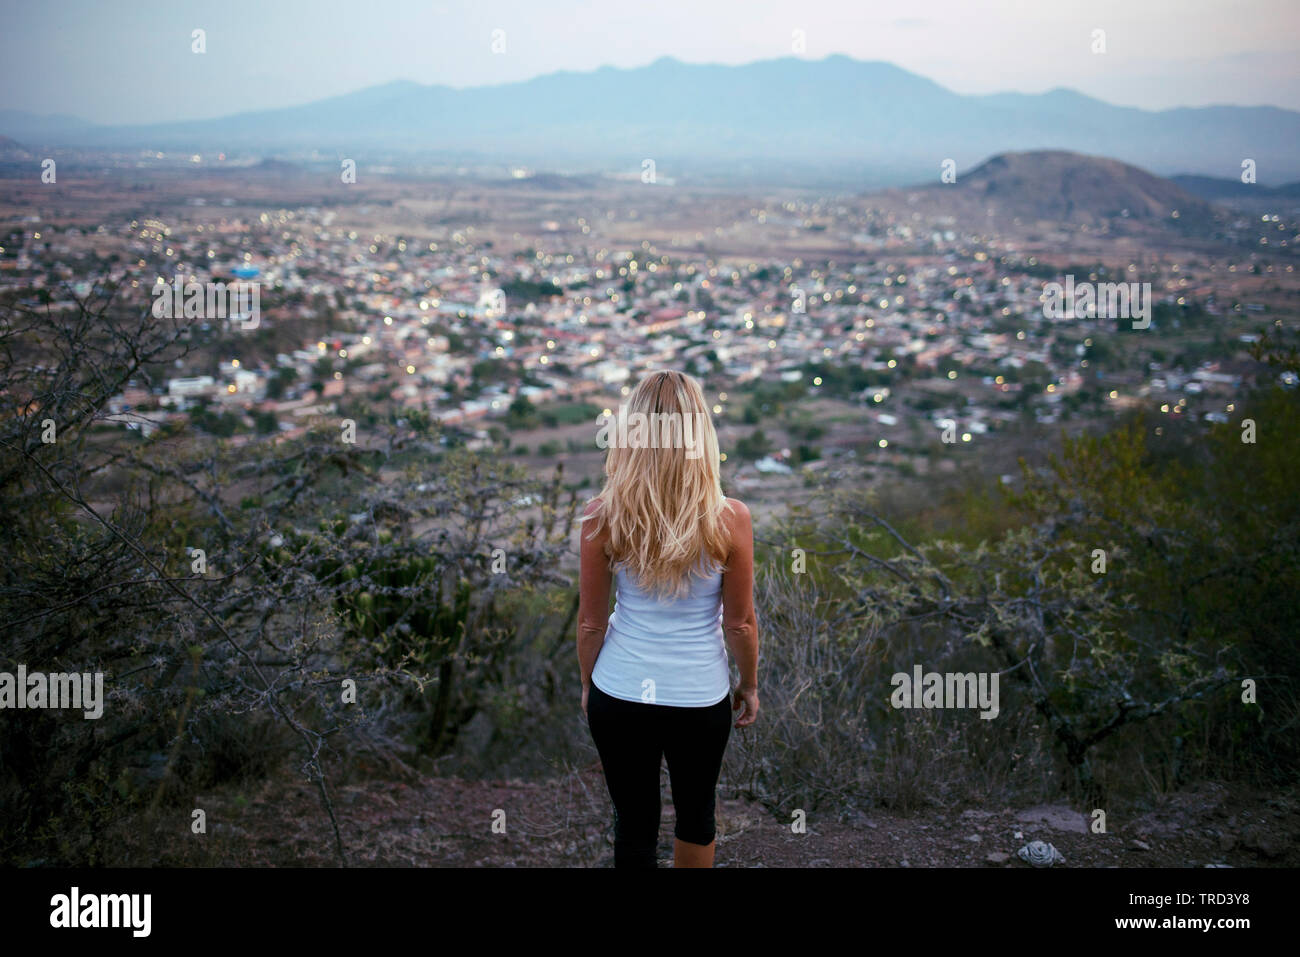 Blonde woman from behind looking at view standing above the town. Teotitlan del Valle, Oaxaca State, Mexico. May 2019 Stock Photo